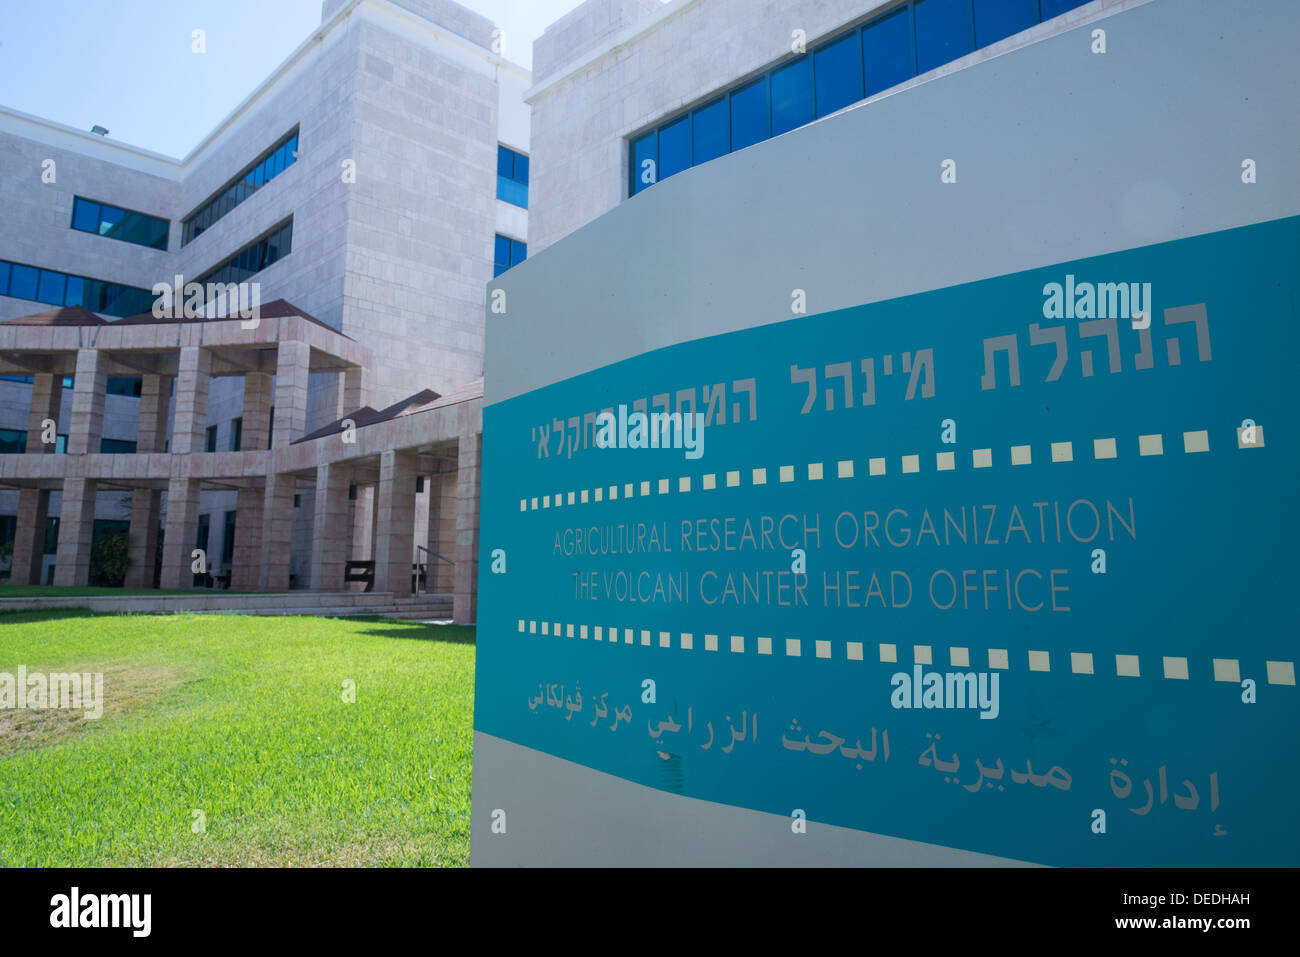 Agricultural Research organization. Volcani Center. Bet Dagan. Israel. Stock Photo